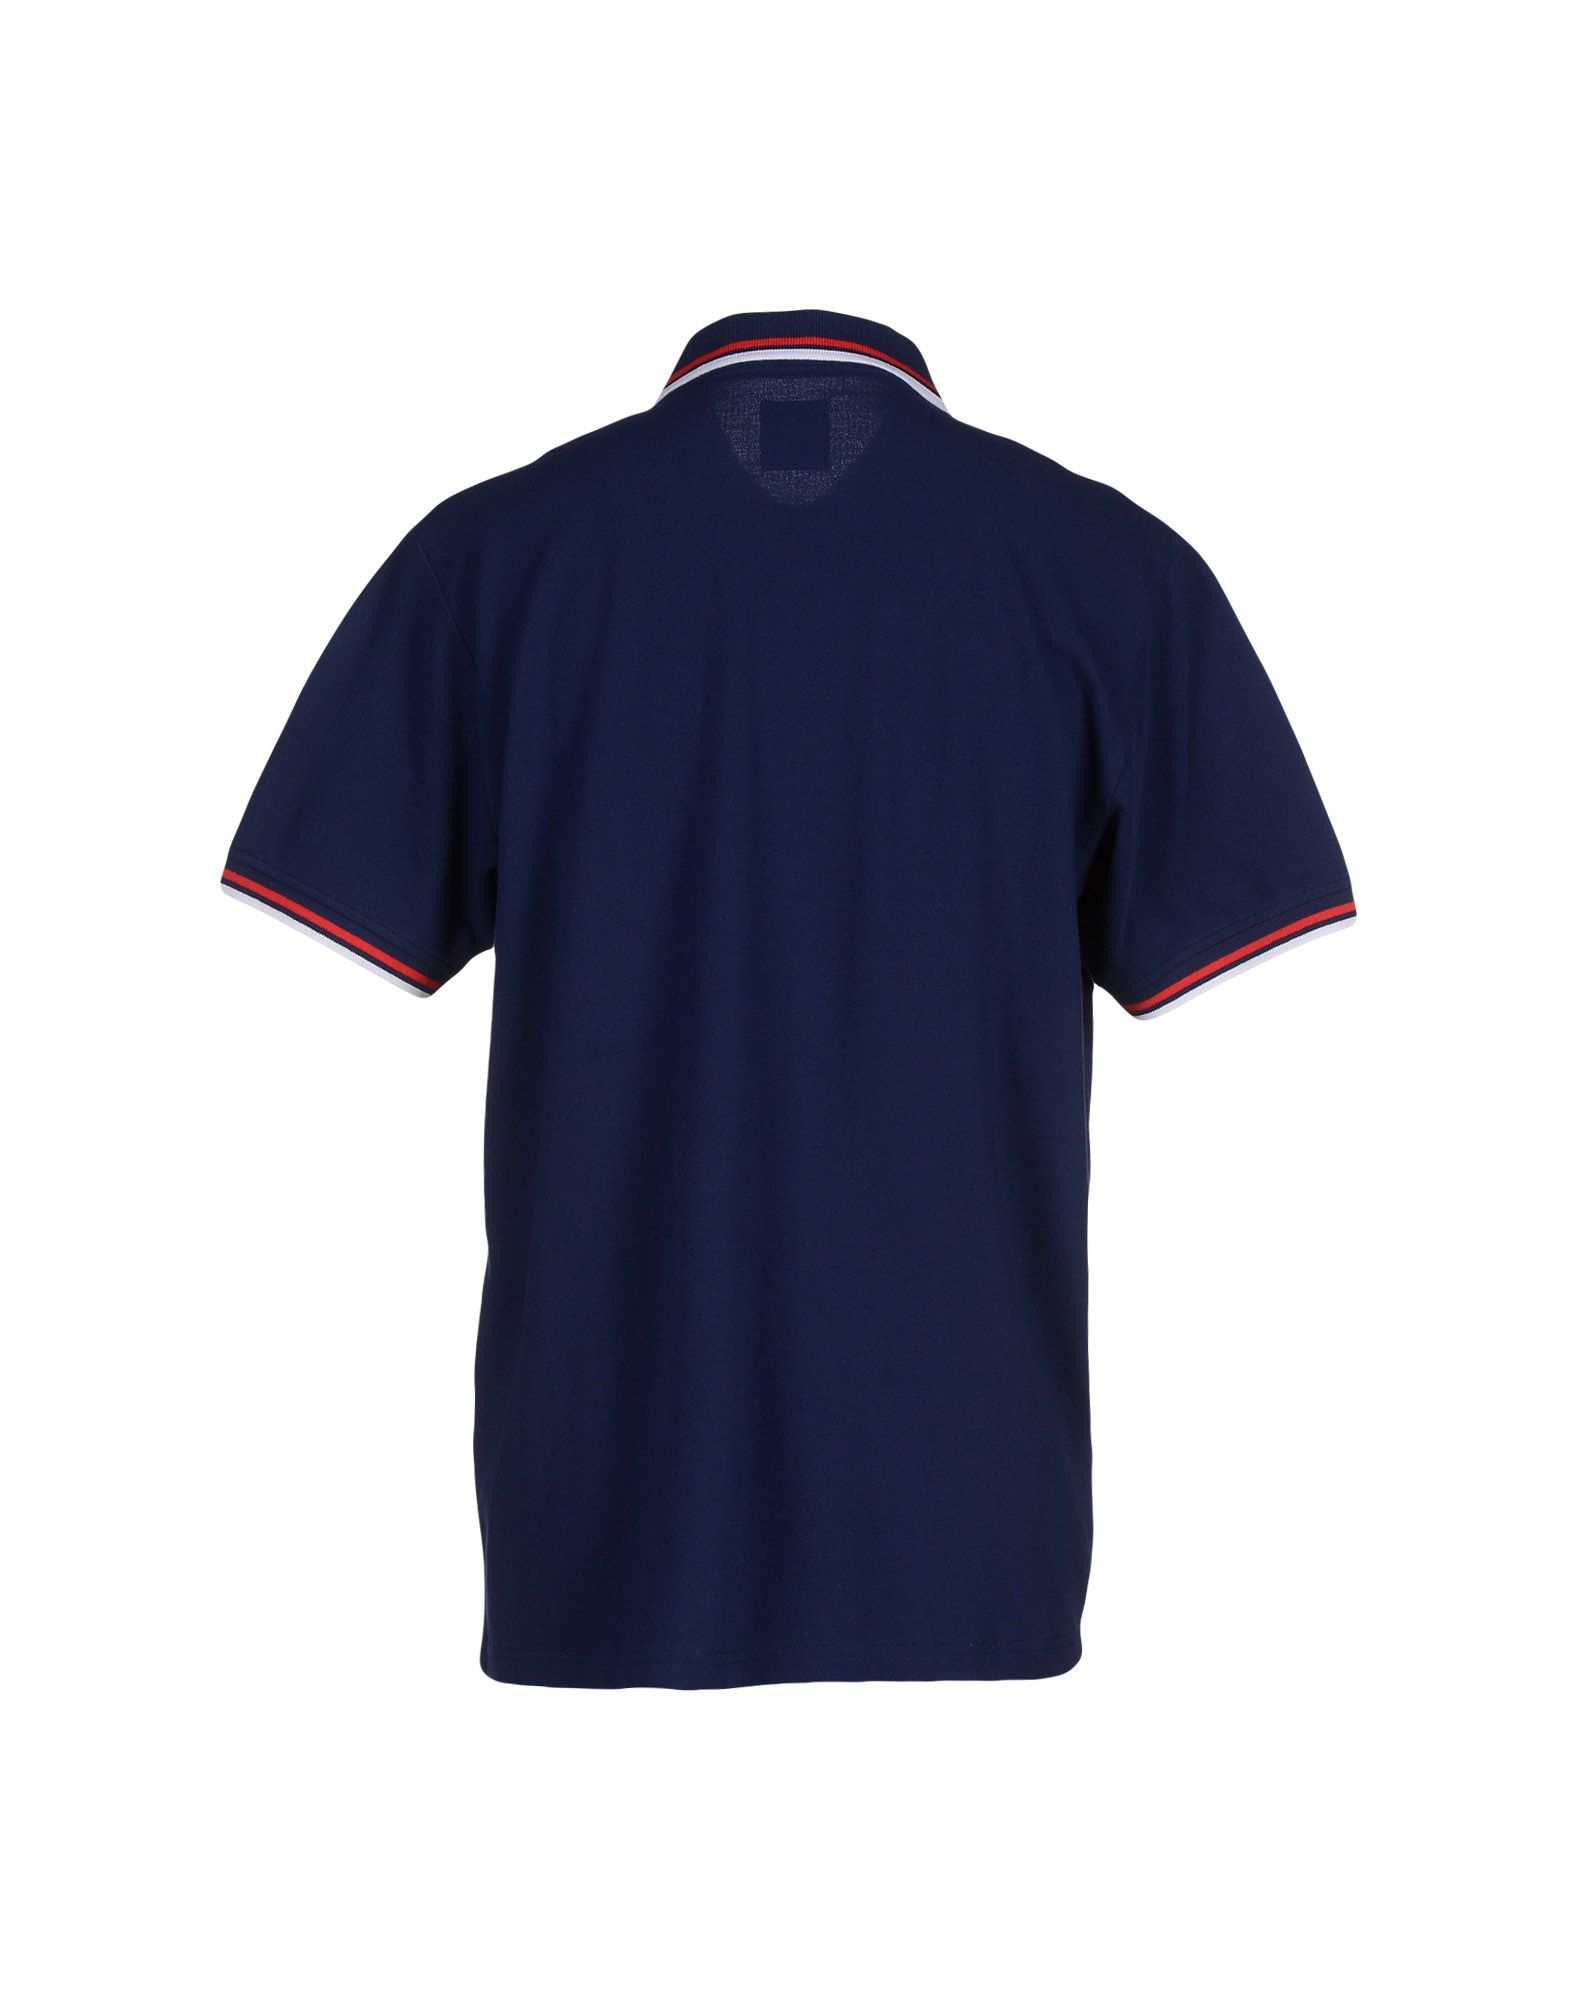 Lyst - Dickies Polo Shirt in Blue for Men